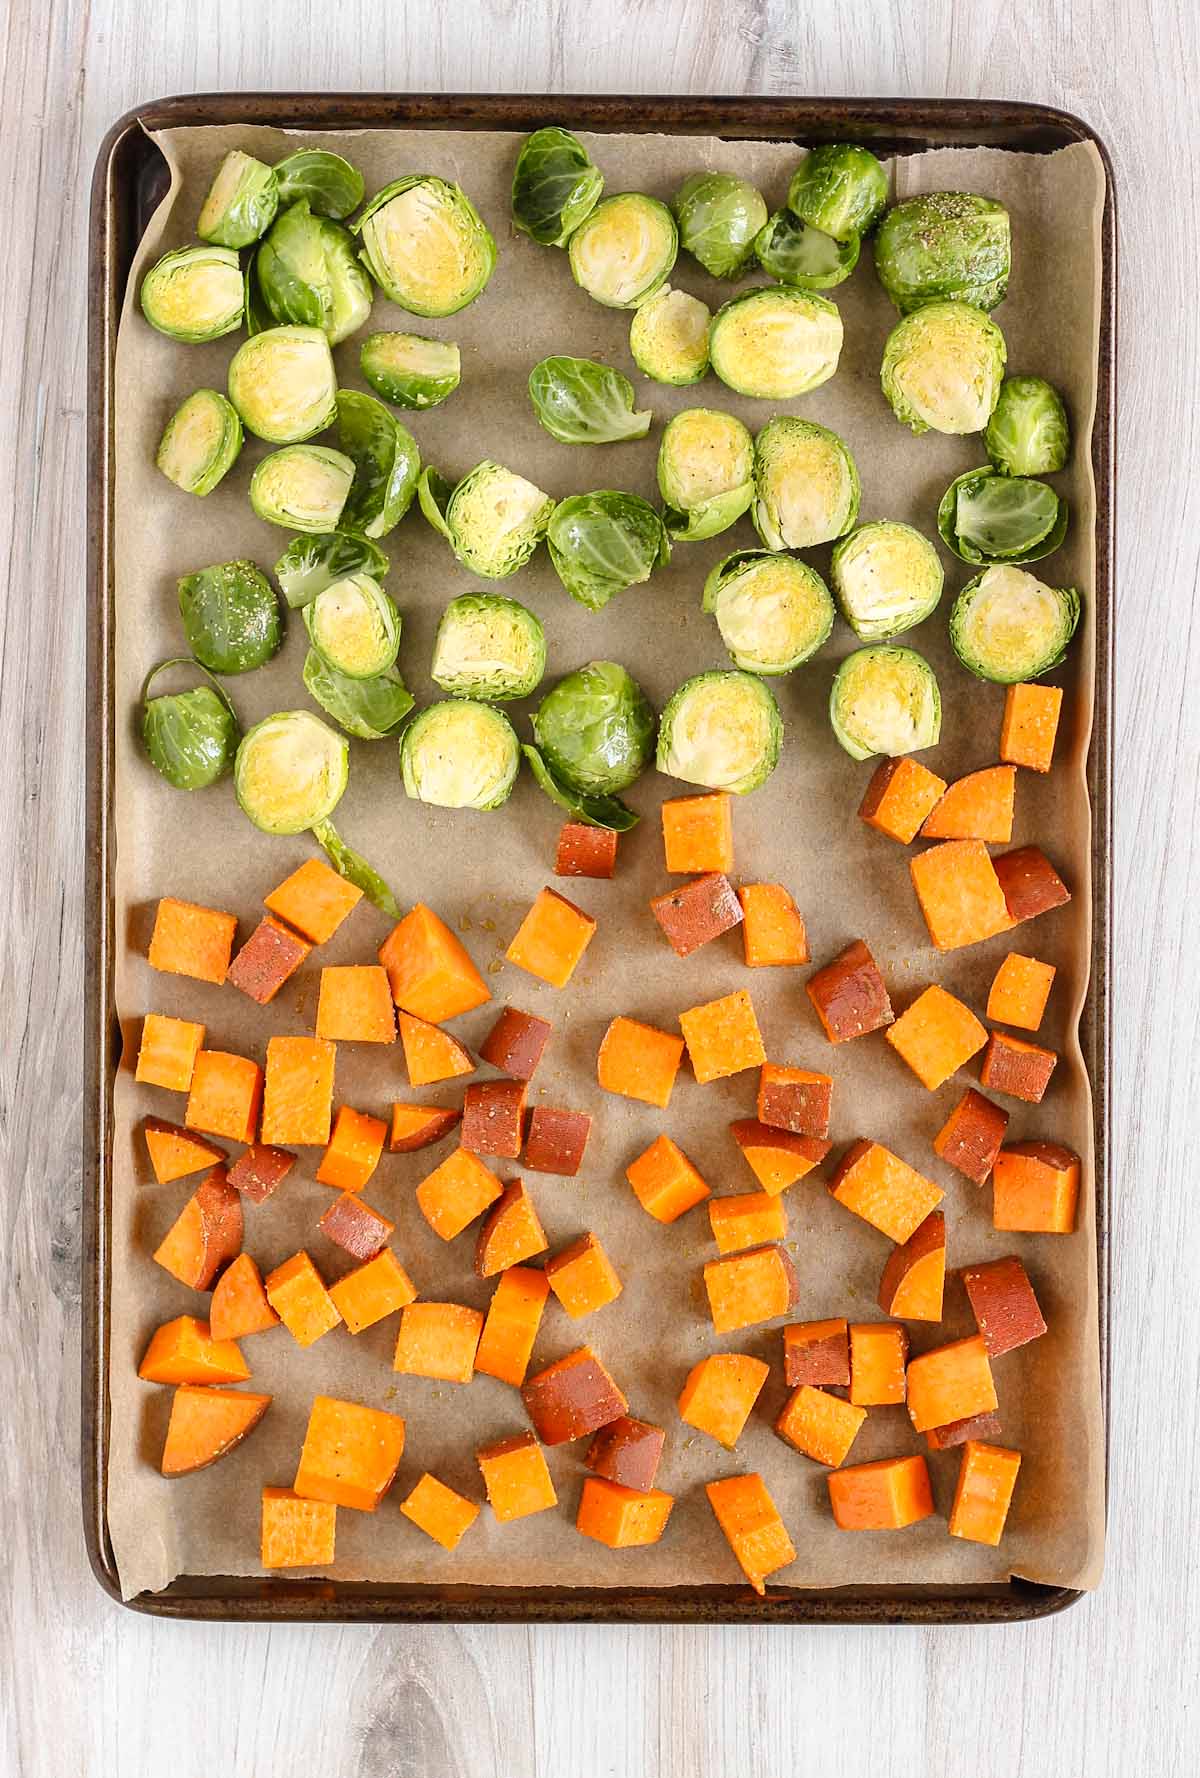 Raw Brussels sprouts and cubed sweet potatoes on a baking sheet.